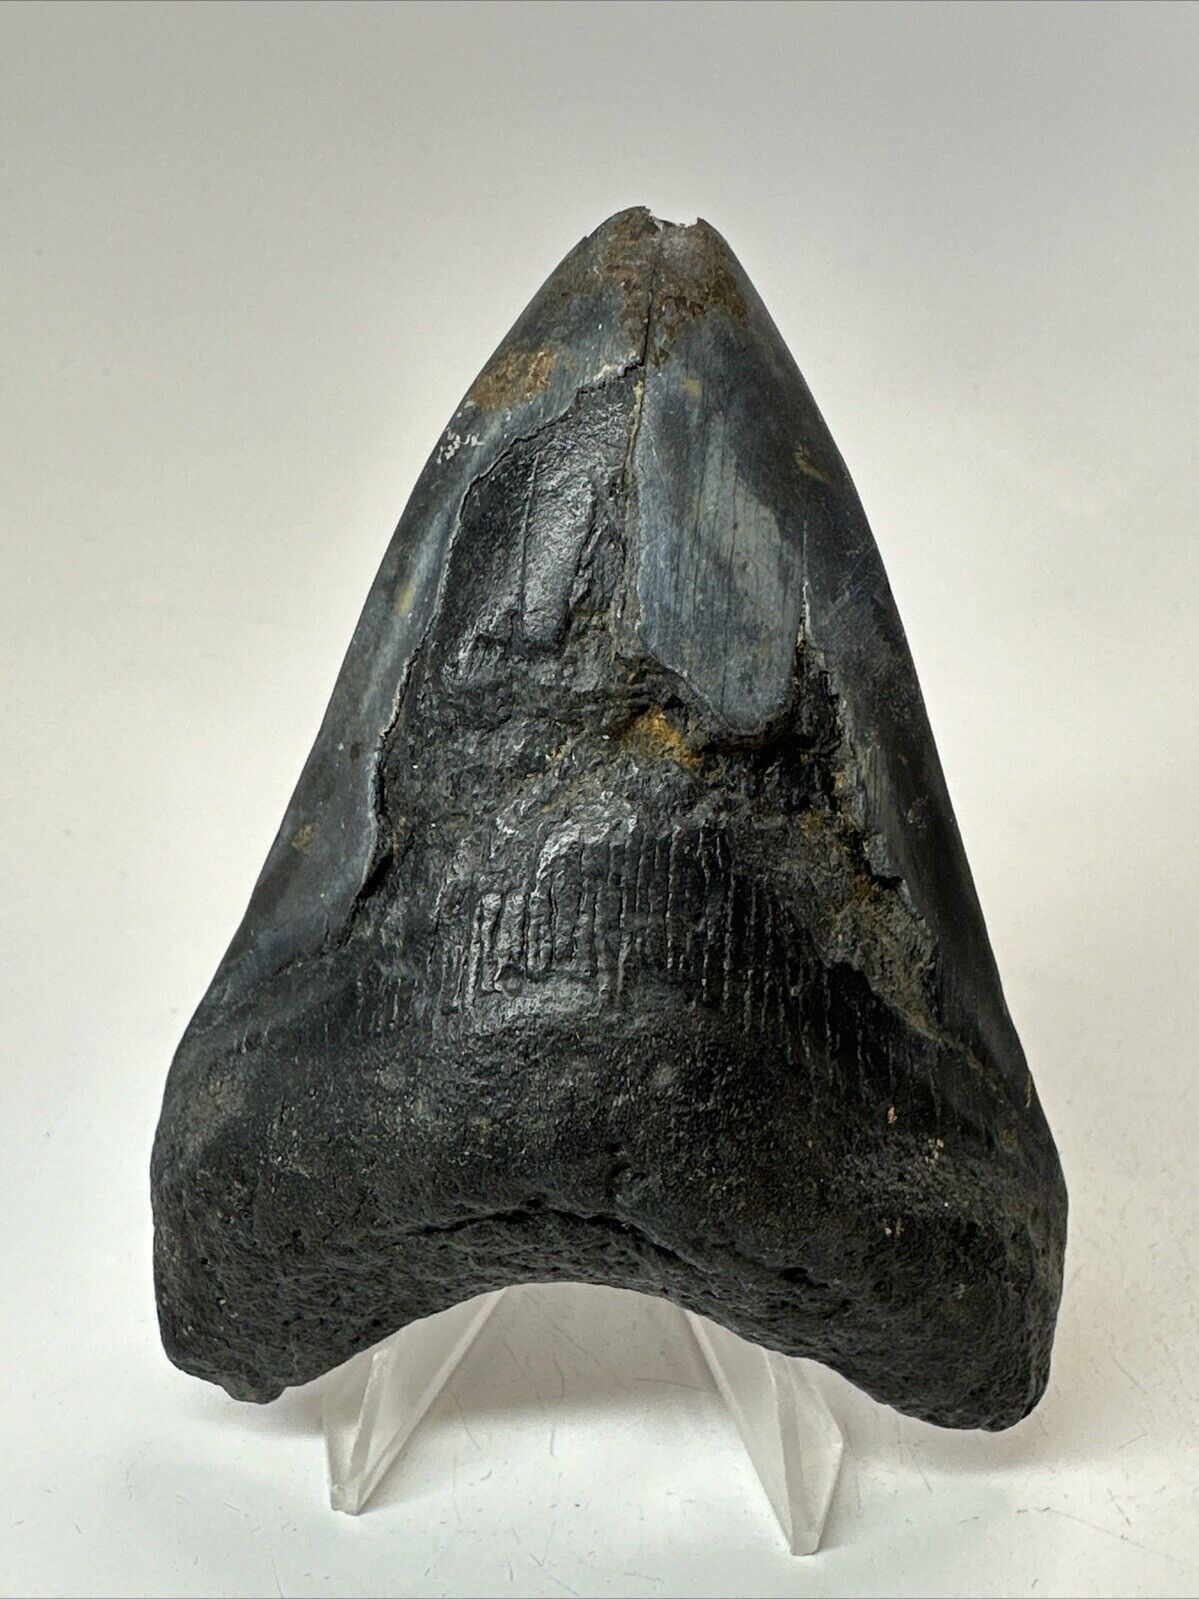 Megalodon Shark Tooth 3.94” Natural - Real Fossil - Rare 18477